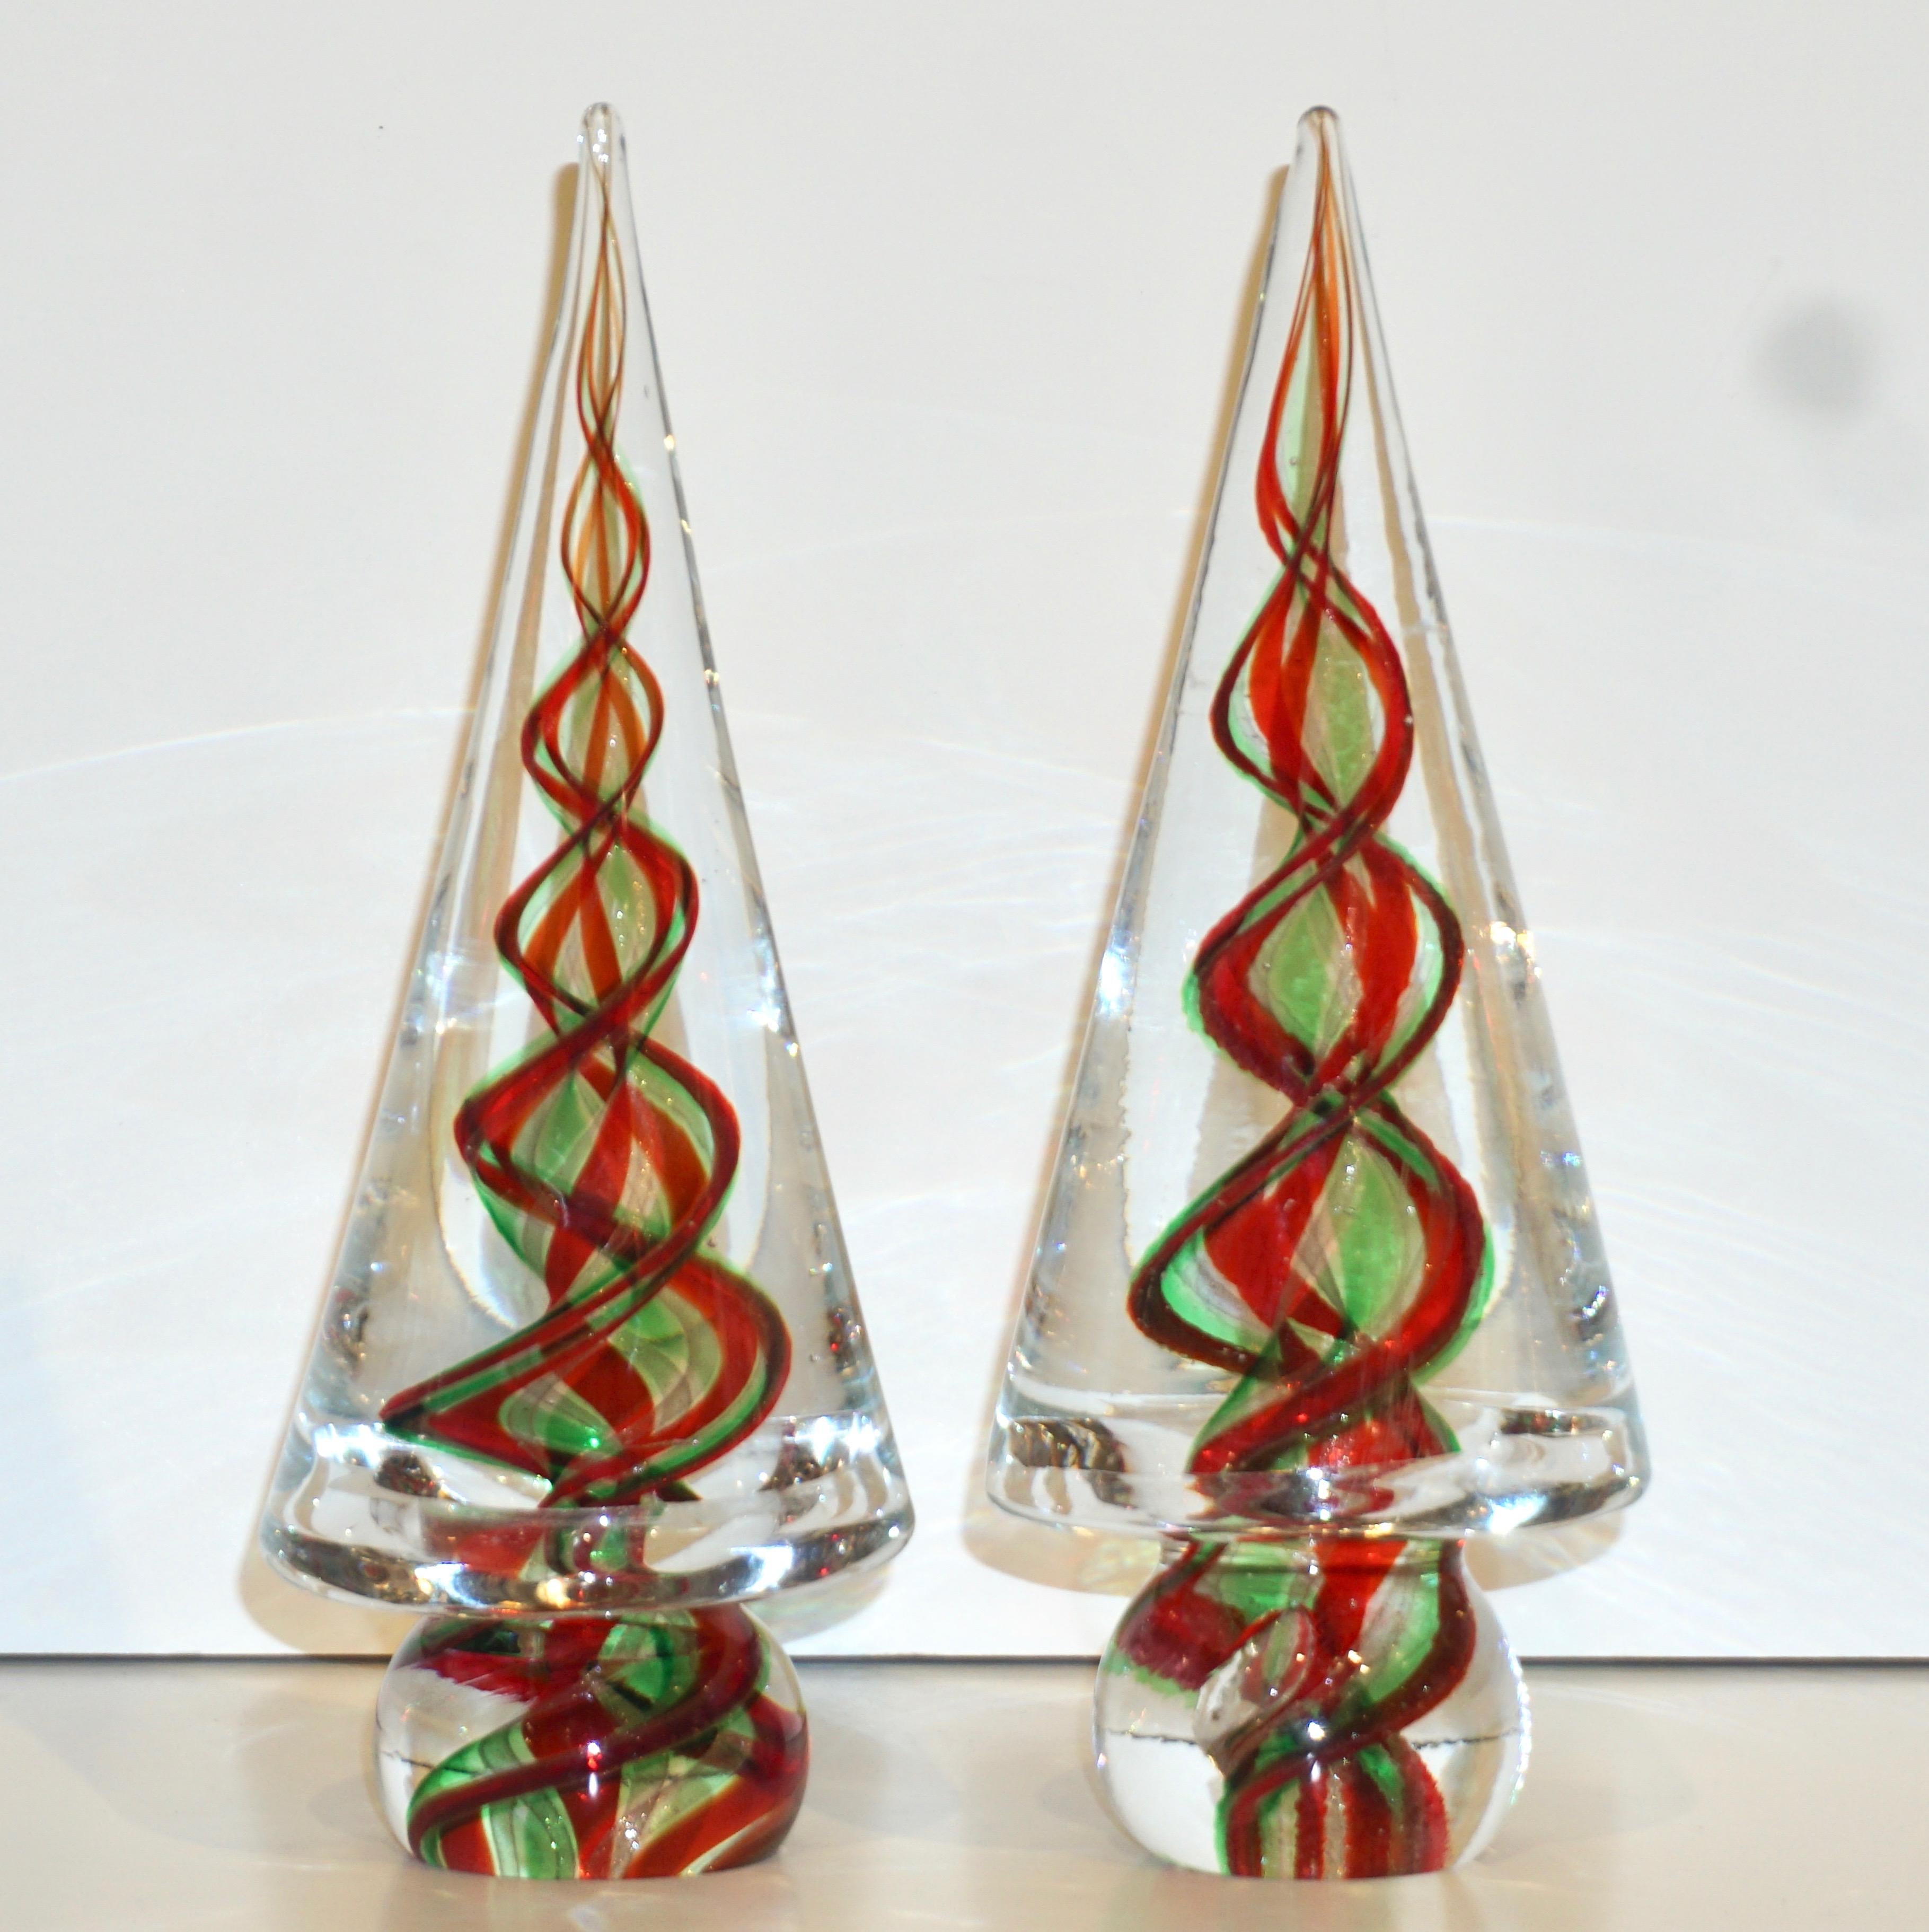 A pair is available, Venetian Christmas tree sculpture of organic sleek Minimalist cone design, in handcrafted mouth-blown Murano glass, part of a vintage collection assembled by Cosulich Interiors & Antiques signed by Cenedese. Worked in Sommerso,